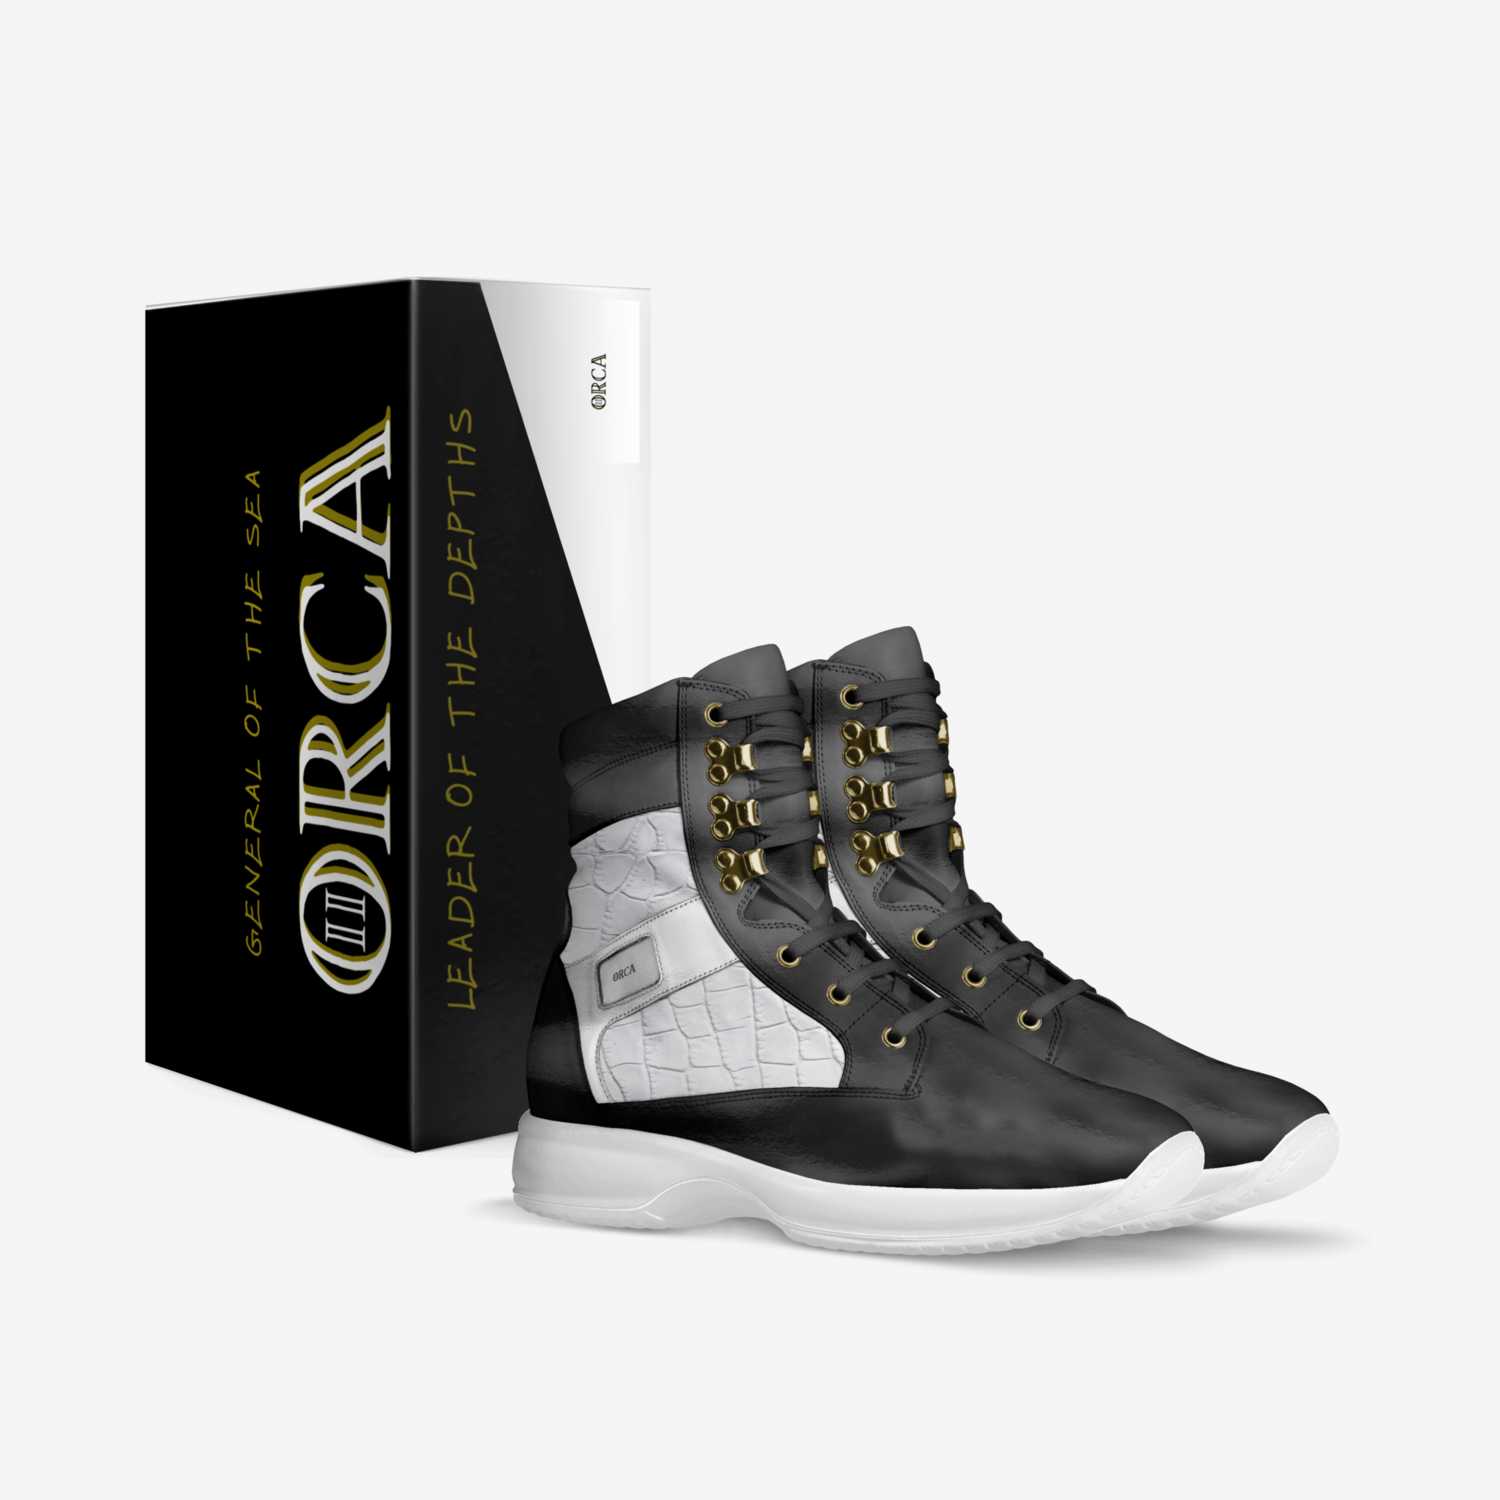 ORCA II custom made in Italy shoes by Avrage2savage Luxury | Box view